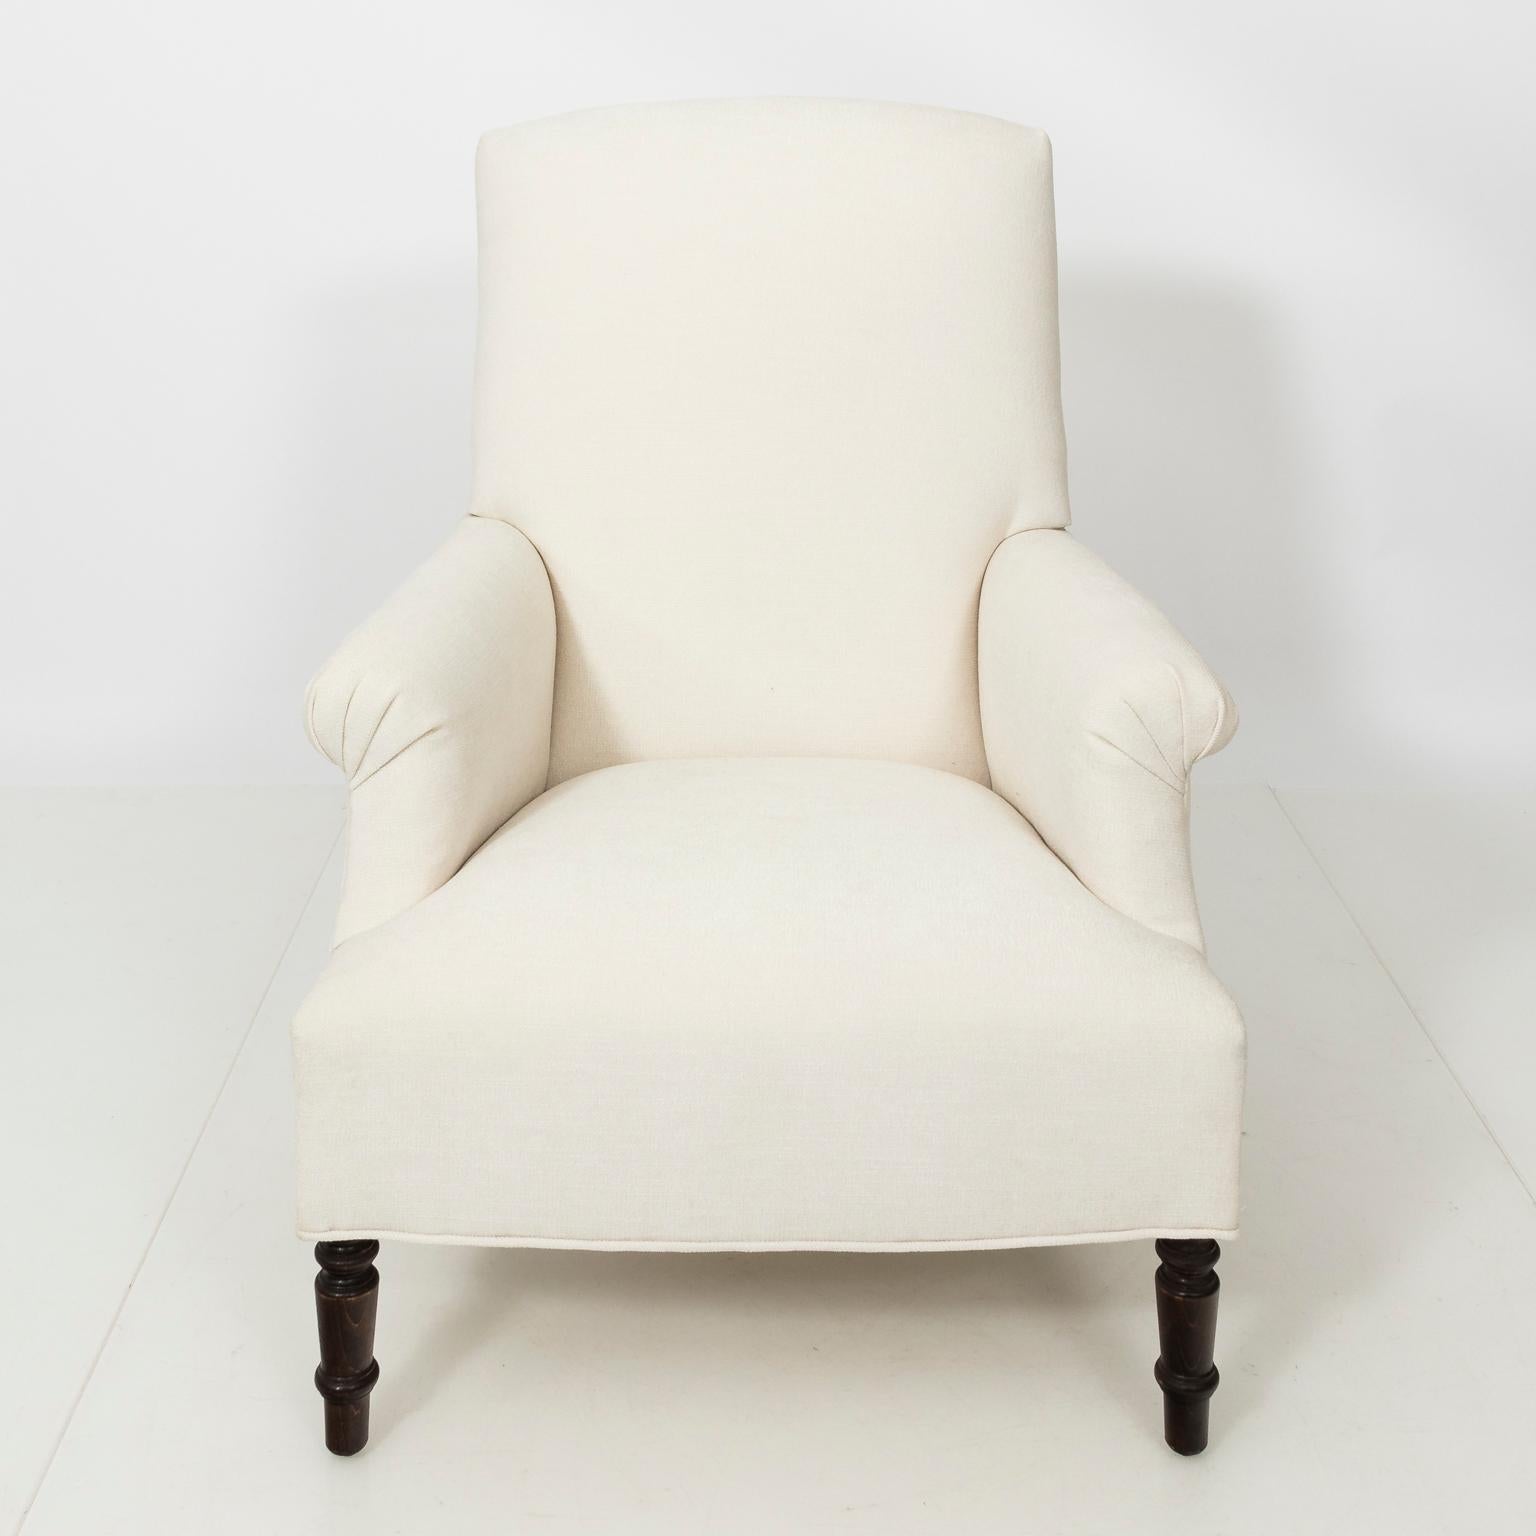 Pair of Napoleon III style armchair with oak ring turned legs in newly upholstered fabric.
 